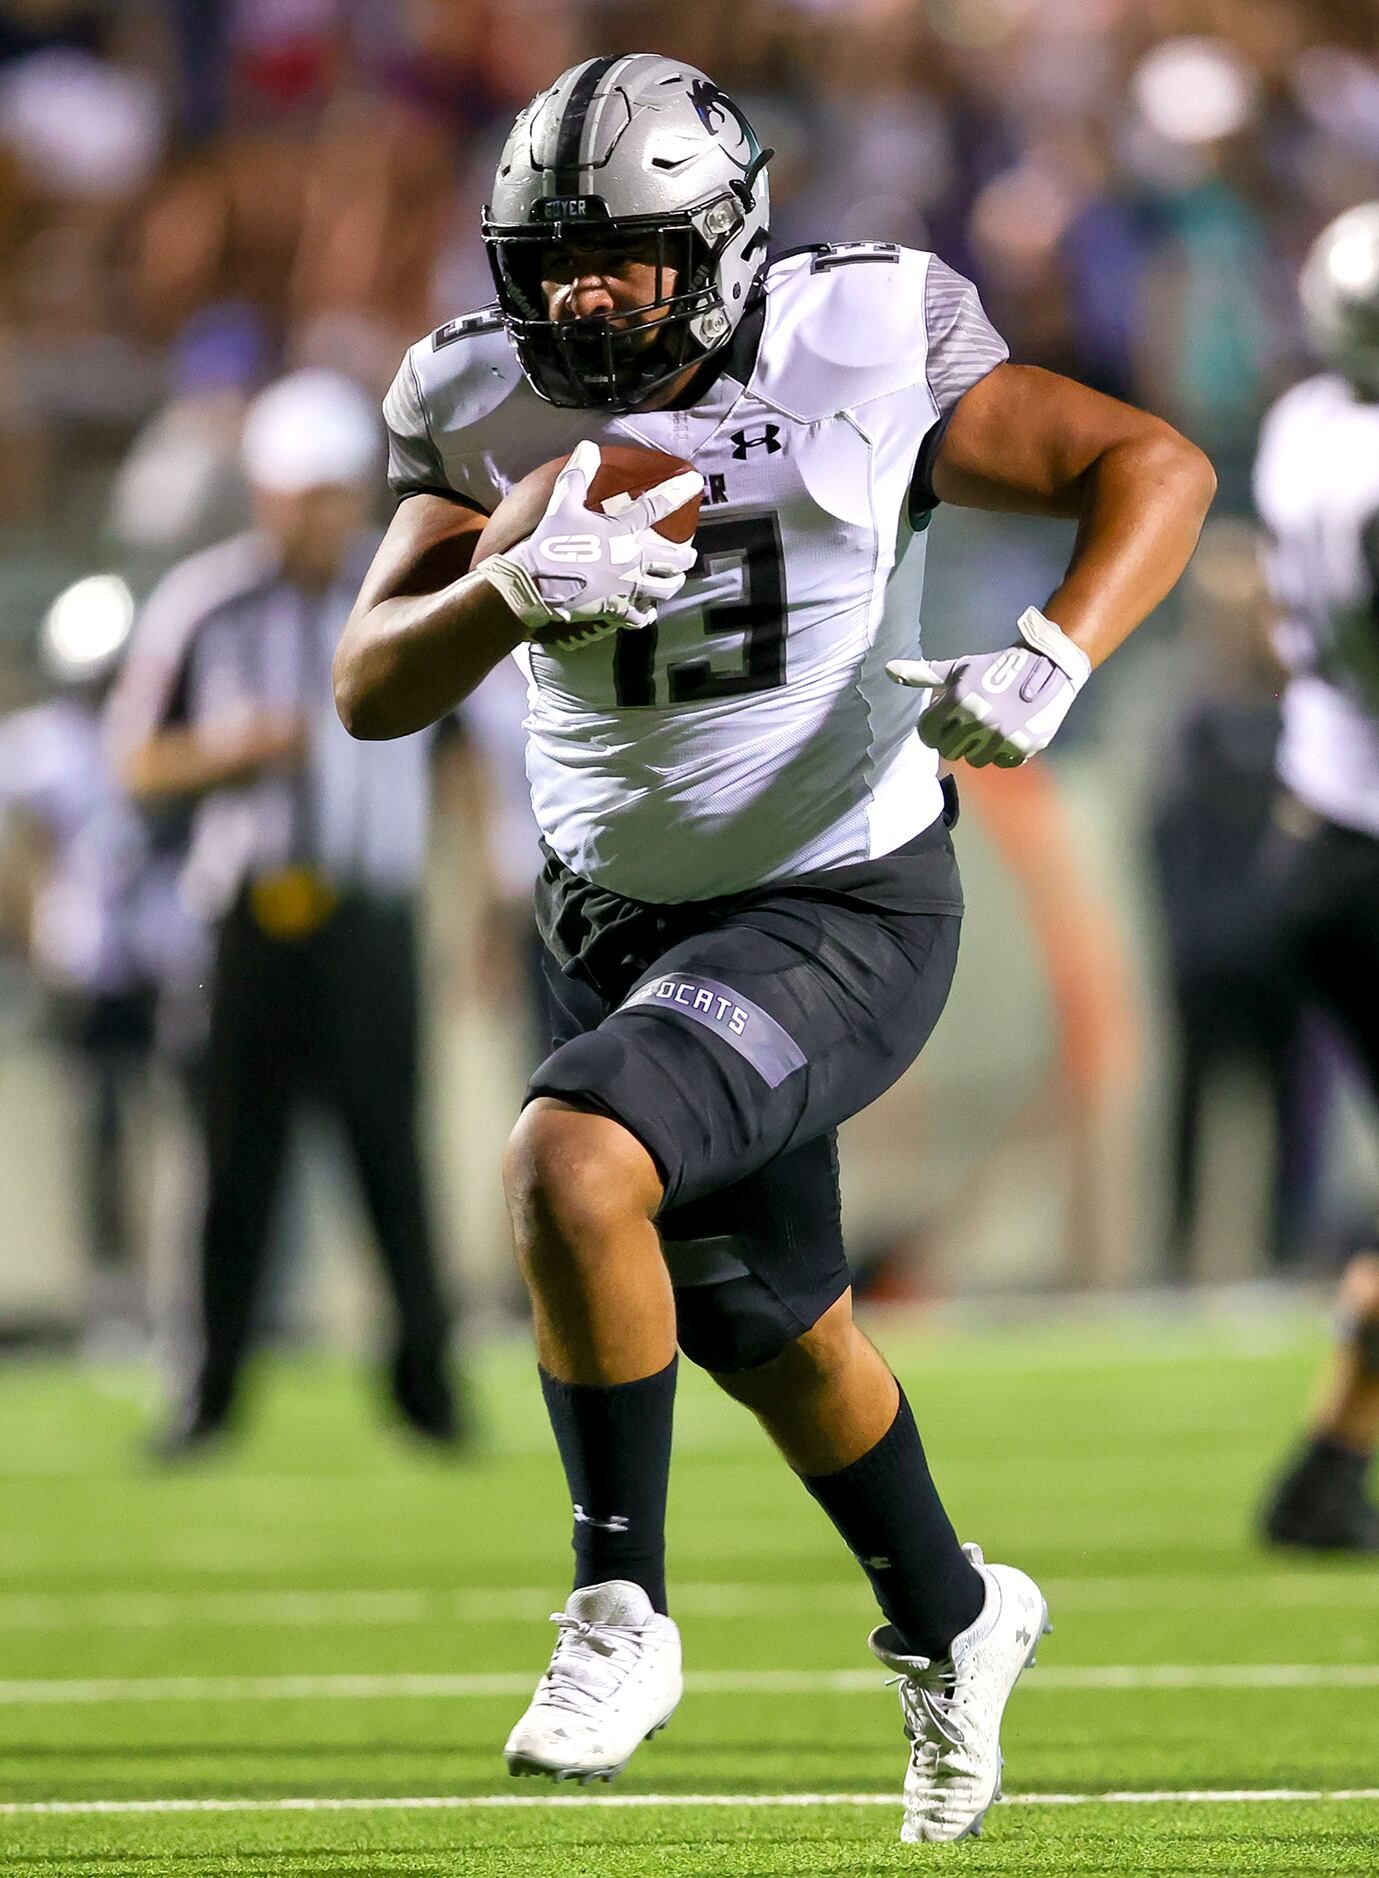 Denton Guyer tight end Dylan Rivero goes 30 yards for a touchdown reception against Denton...